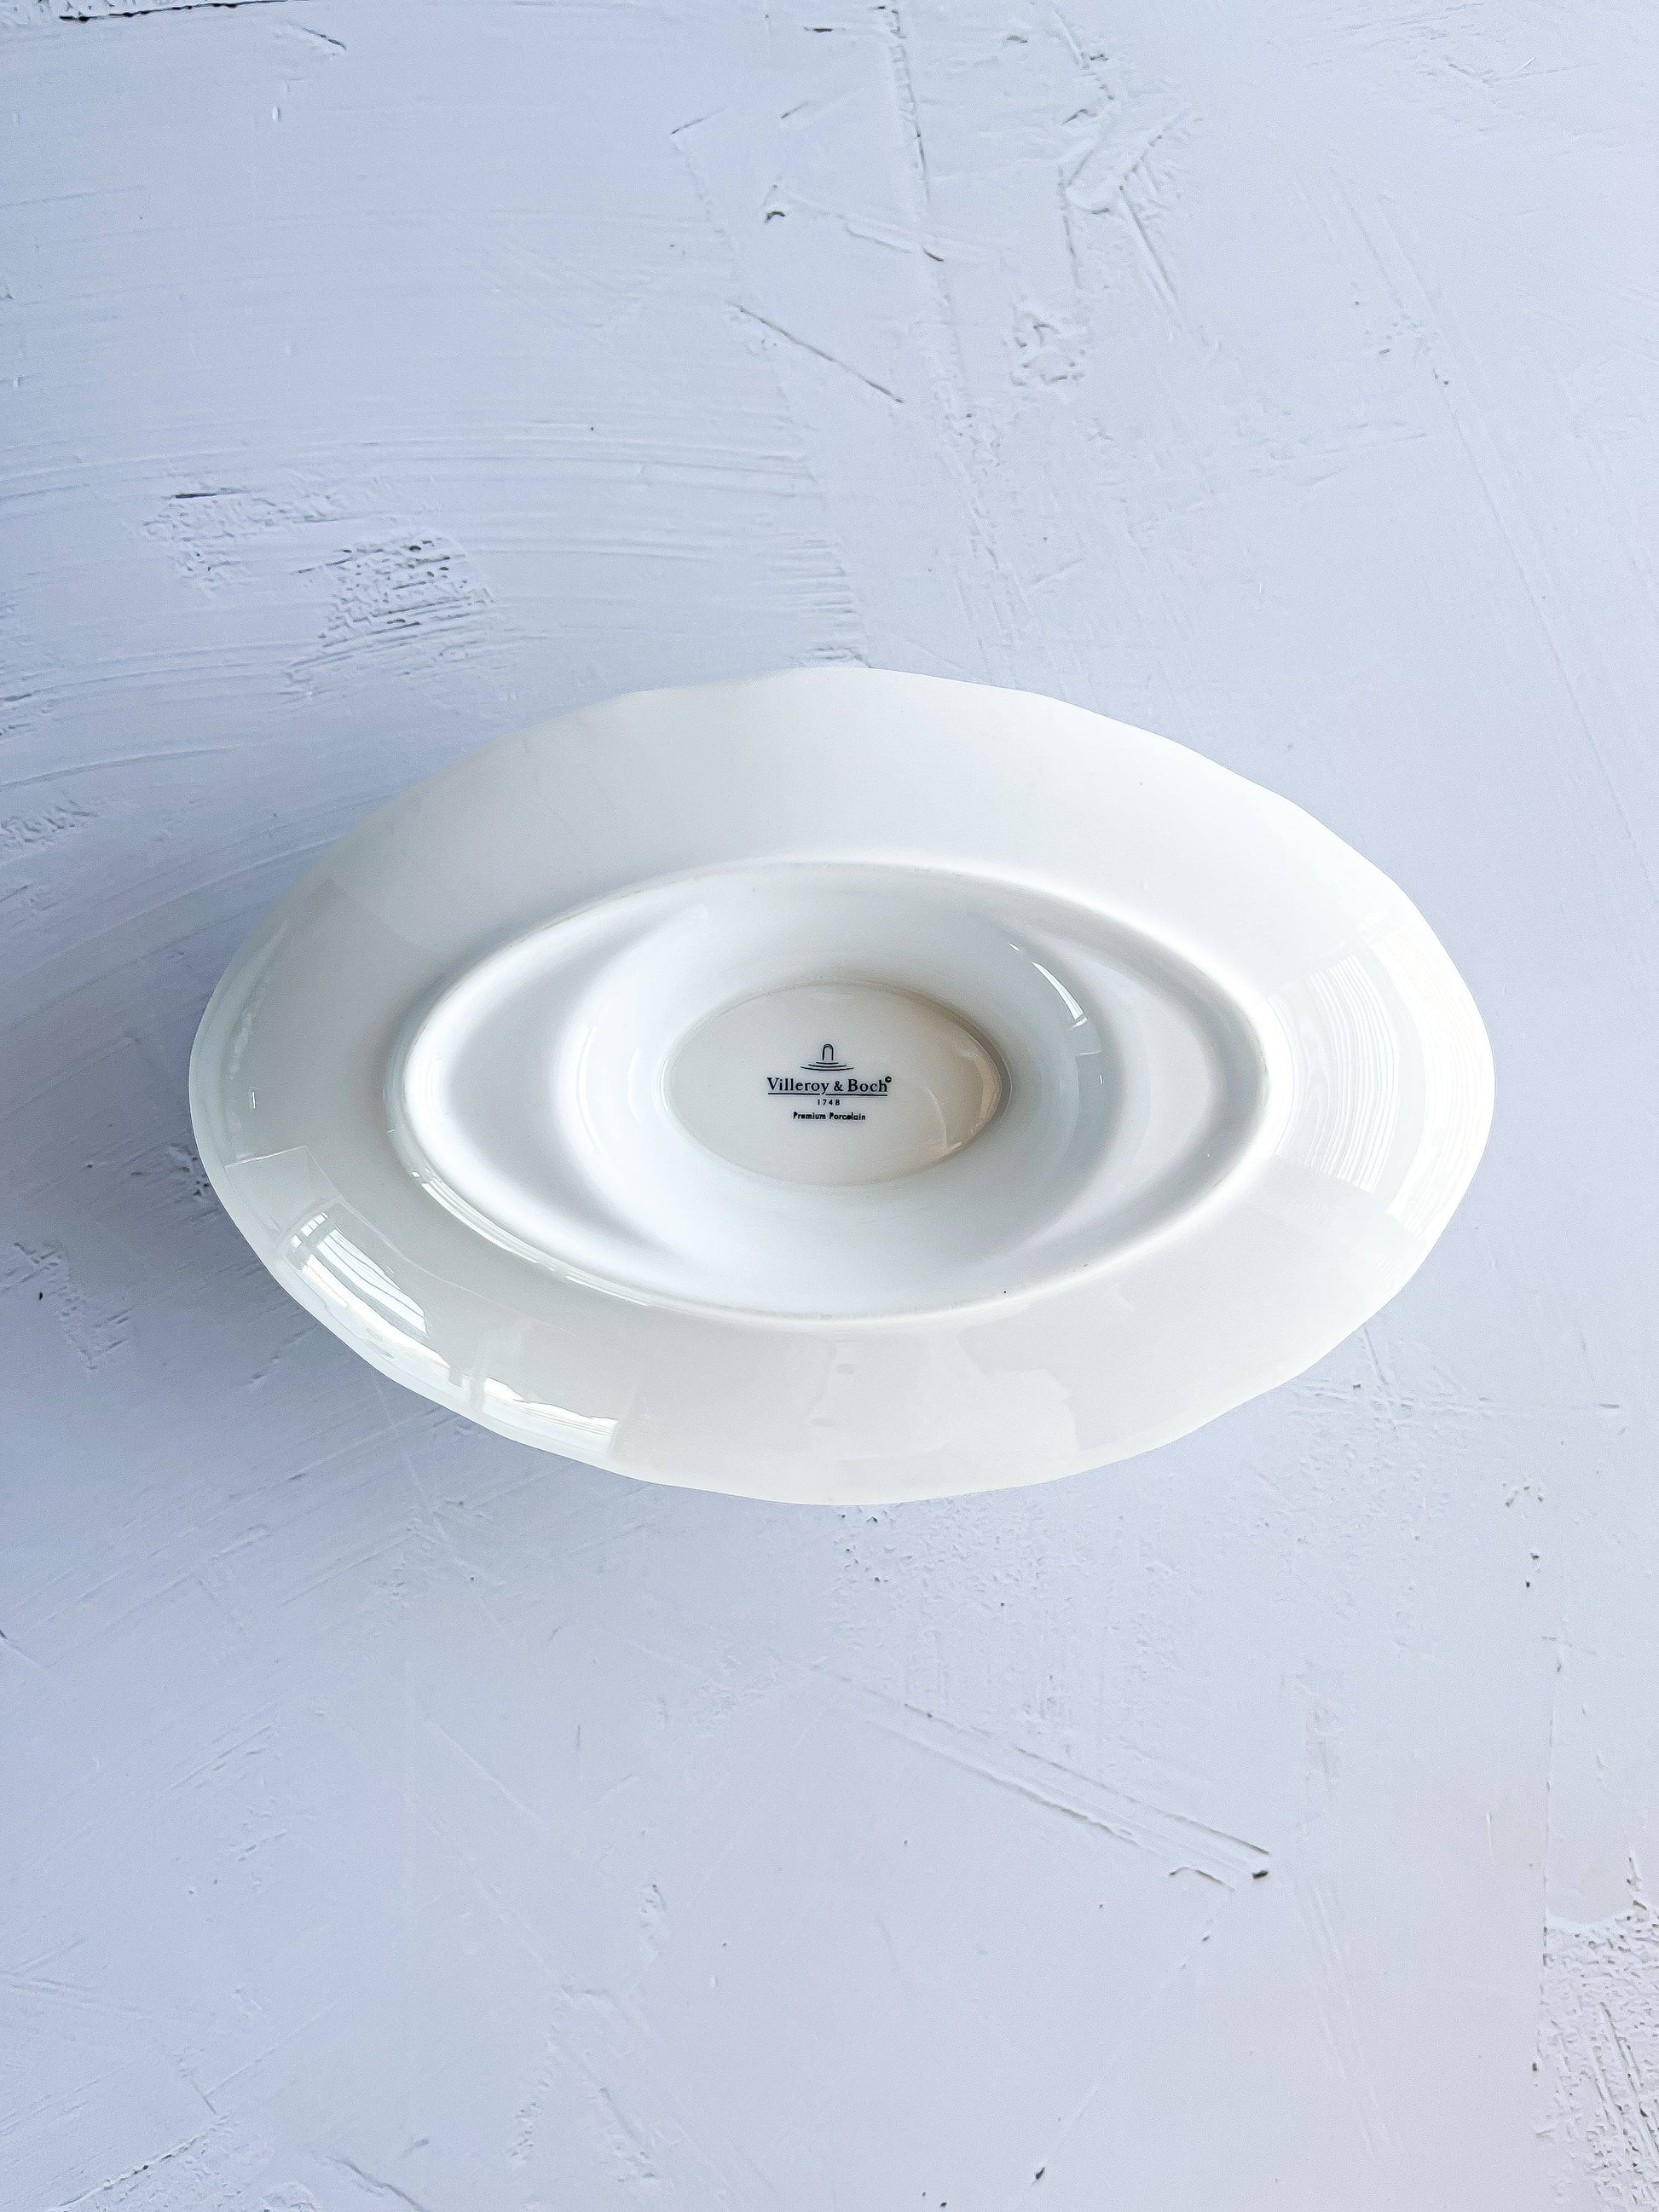 Villeroy & Boch 'Vieux Luxembourg' Sauceboat with Attached Saucer - SOSC Home